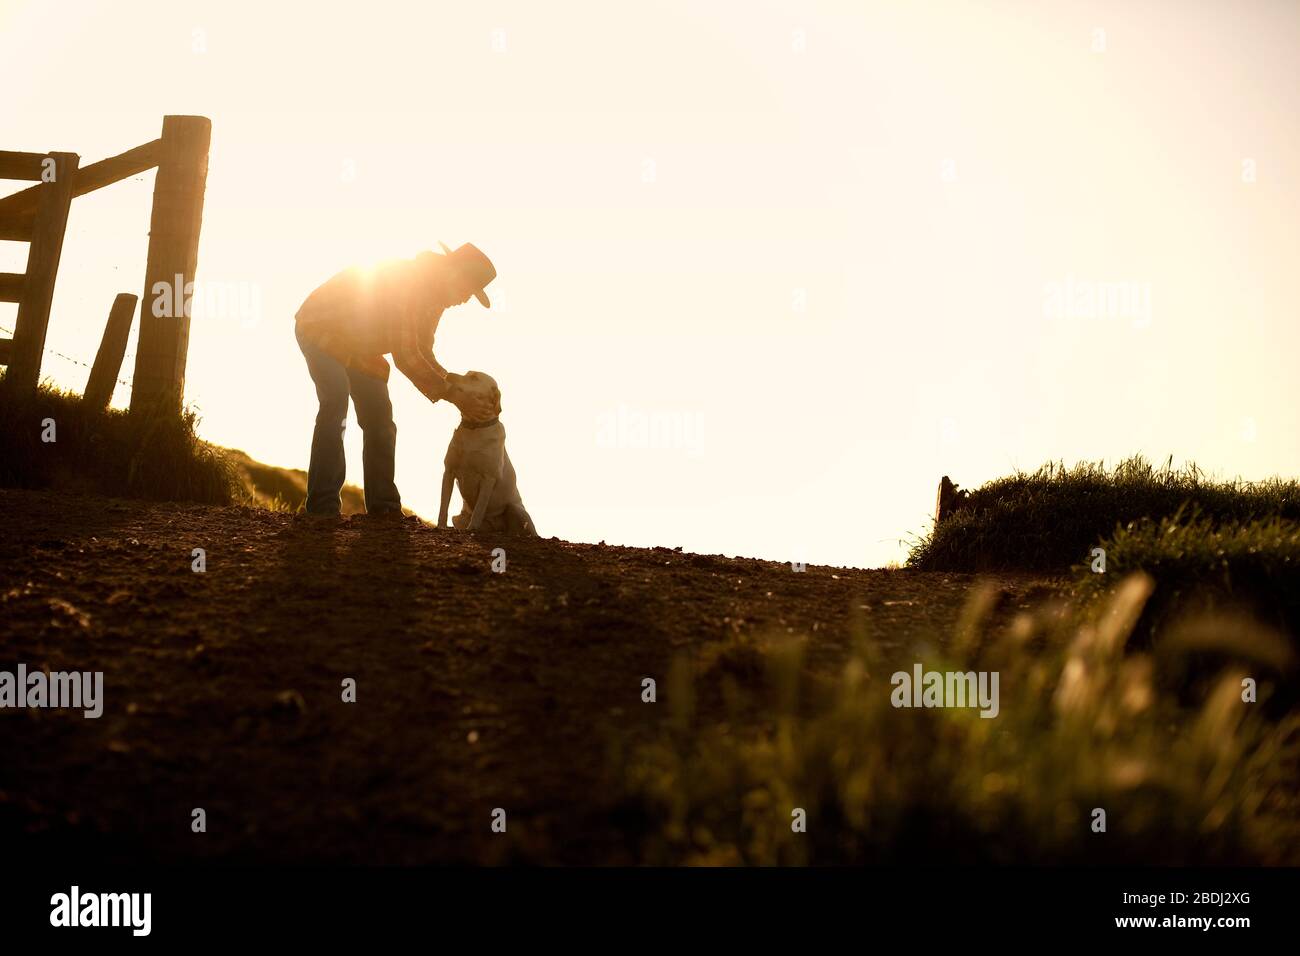 Mid-adult farmer bending down to pat his dog next to a fence post on a dirt road on a farm. Stock Photo